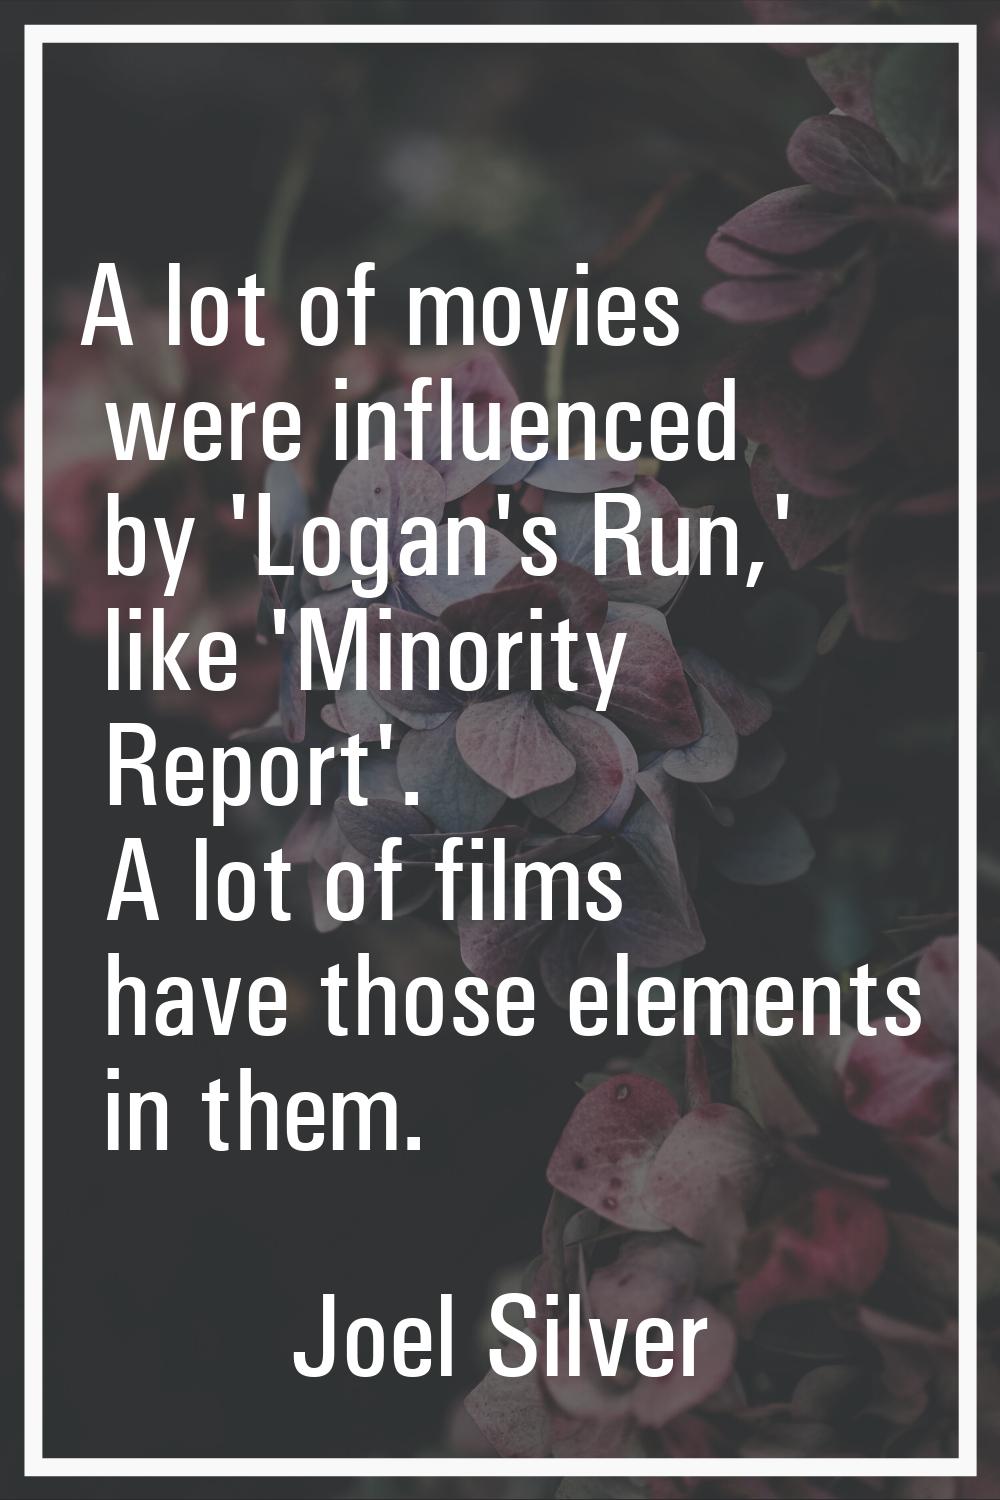 A lot of movies were influenced by 'Logan's Run,' like 'Minority Report'. A lot of films have those